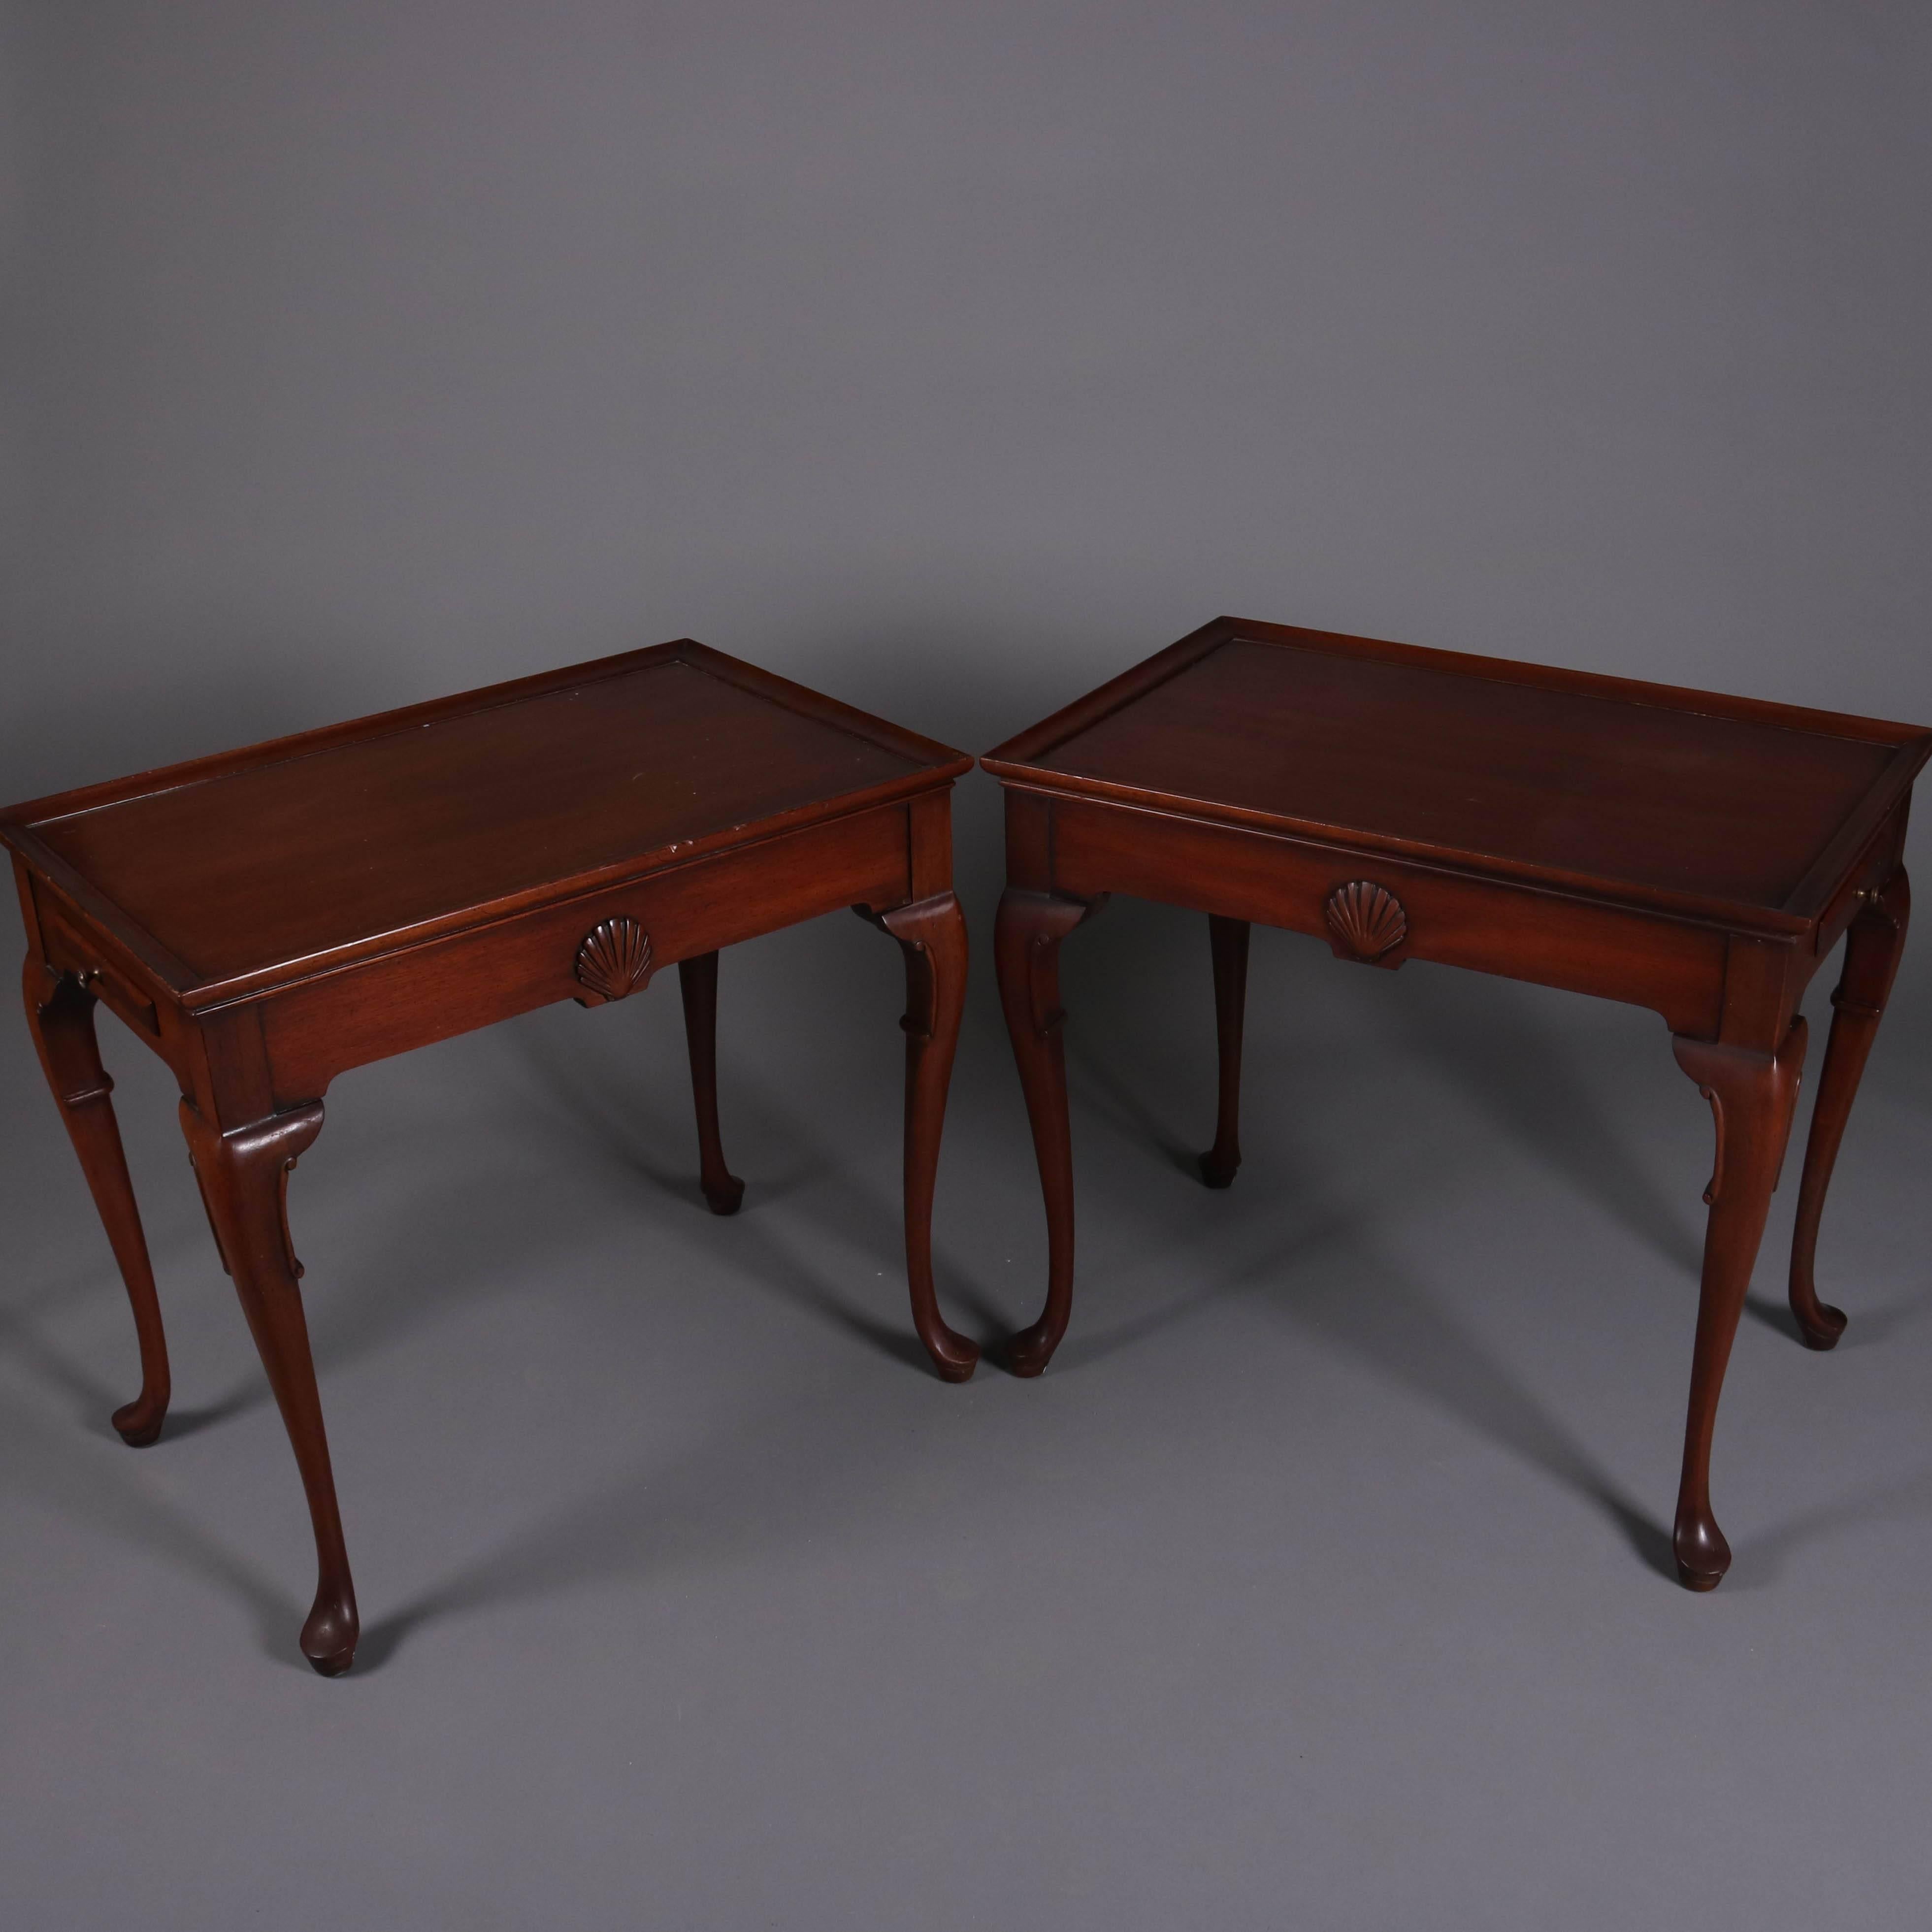 Pair of Queen Anne style Kittinger School mahogany tea tables with candle slides, 20th century

Measures: 25" H x 28" L x 18.5" W.